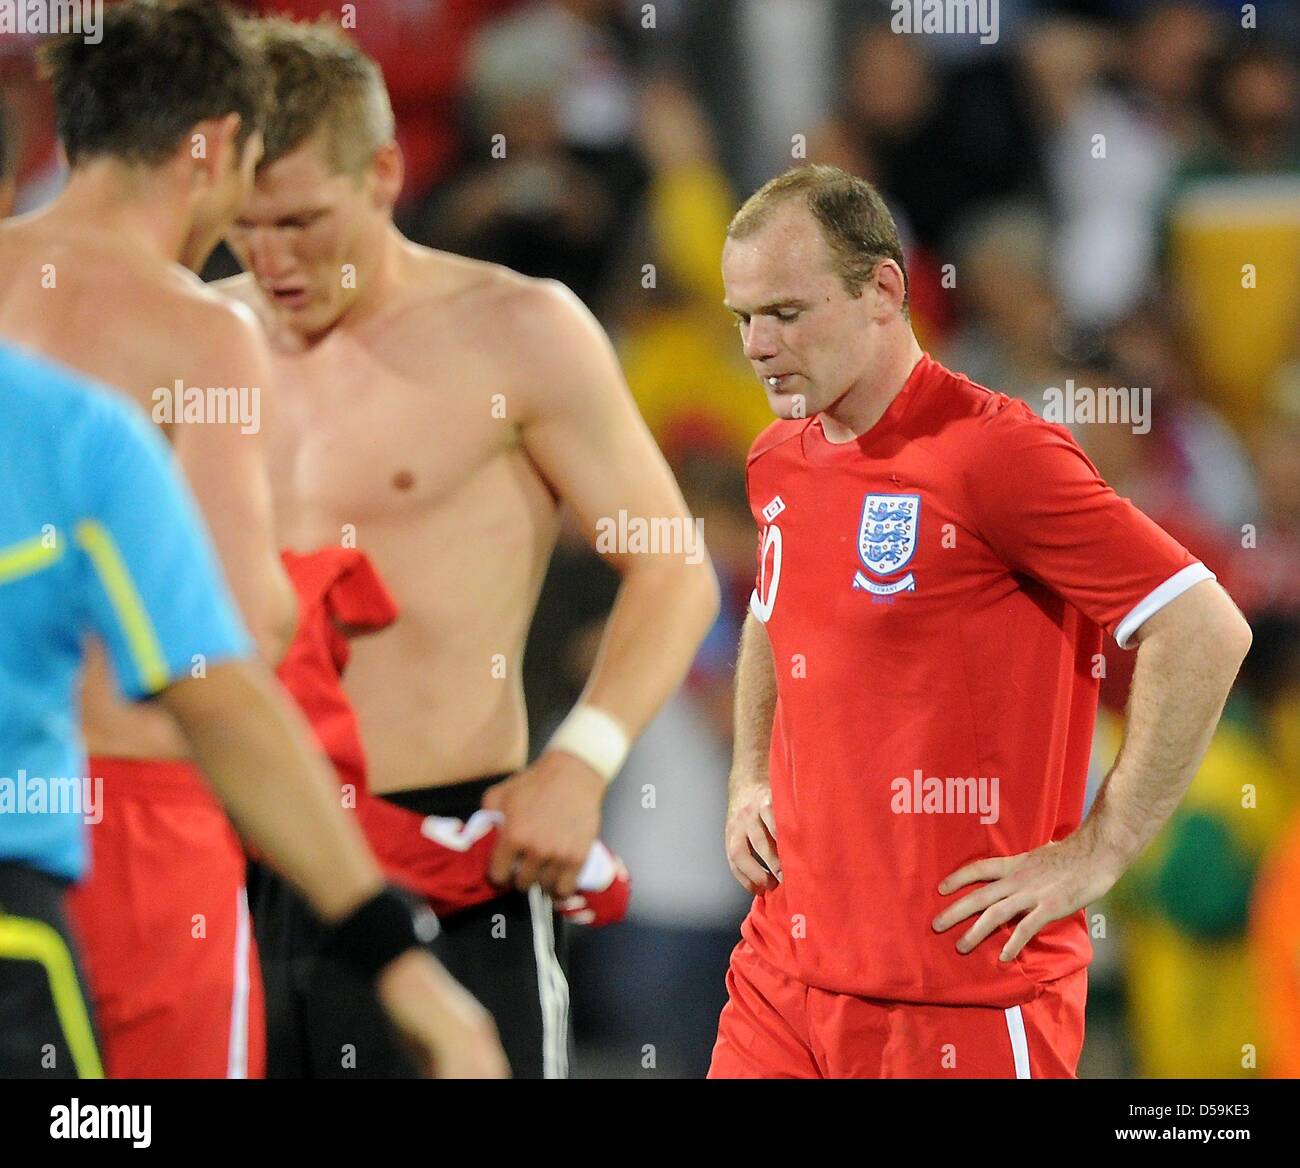 England's Wayne Rooney disappointed after the 2010 FIFA World Cup Round of Sixteen match between Germany and England at the Free State Stadium in Bloemfontein, South Africa 27 June 2010. Photo: Marcus Brandt dpa - Please refer to http://dpaq.de/FIFA-WM2010-TC  +++(c) dpa - Bildfunk+++ Stock Photo